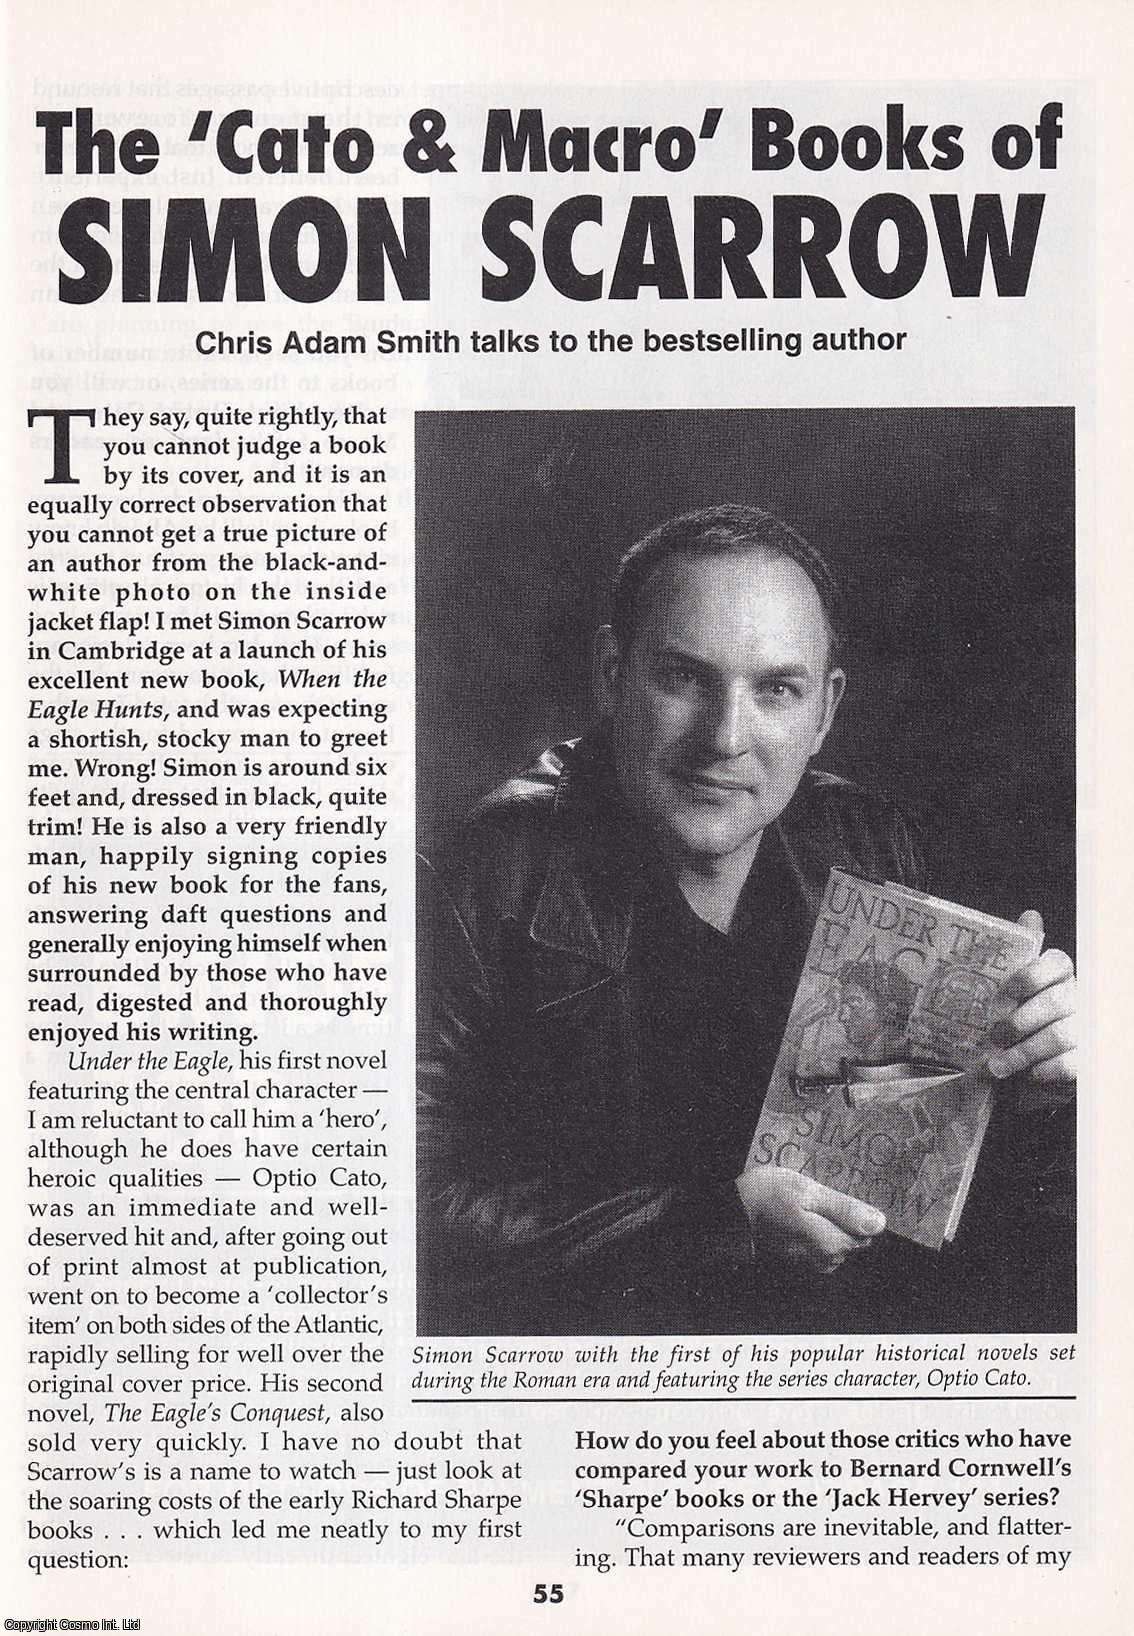 Chris Adam Smith - The Cato & Macro Books of Simon Scarrow. This is an original article separated from an issue of The Book & Magazine Collector publication.